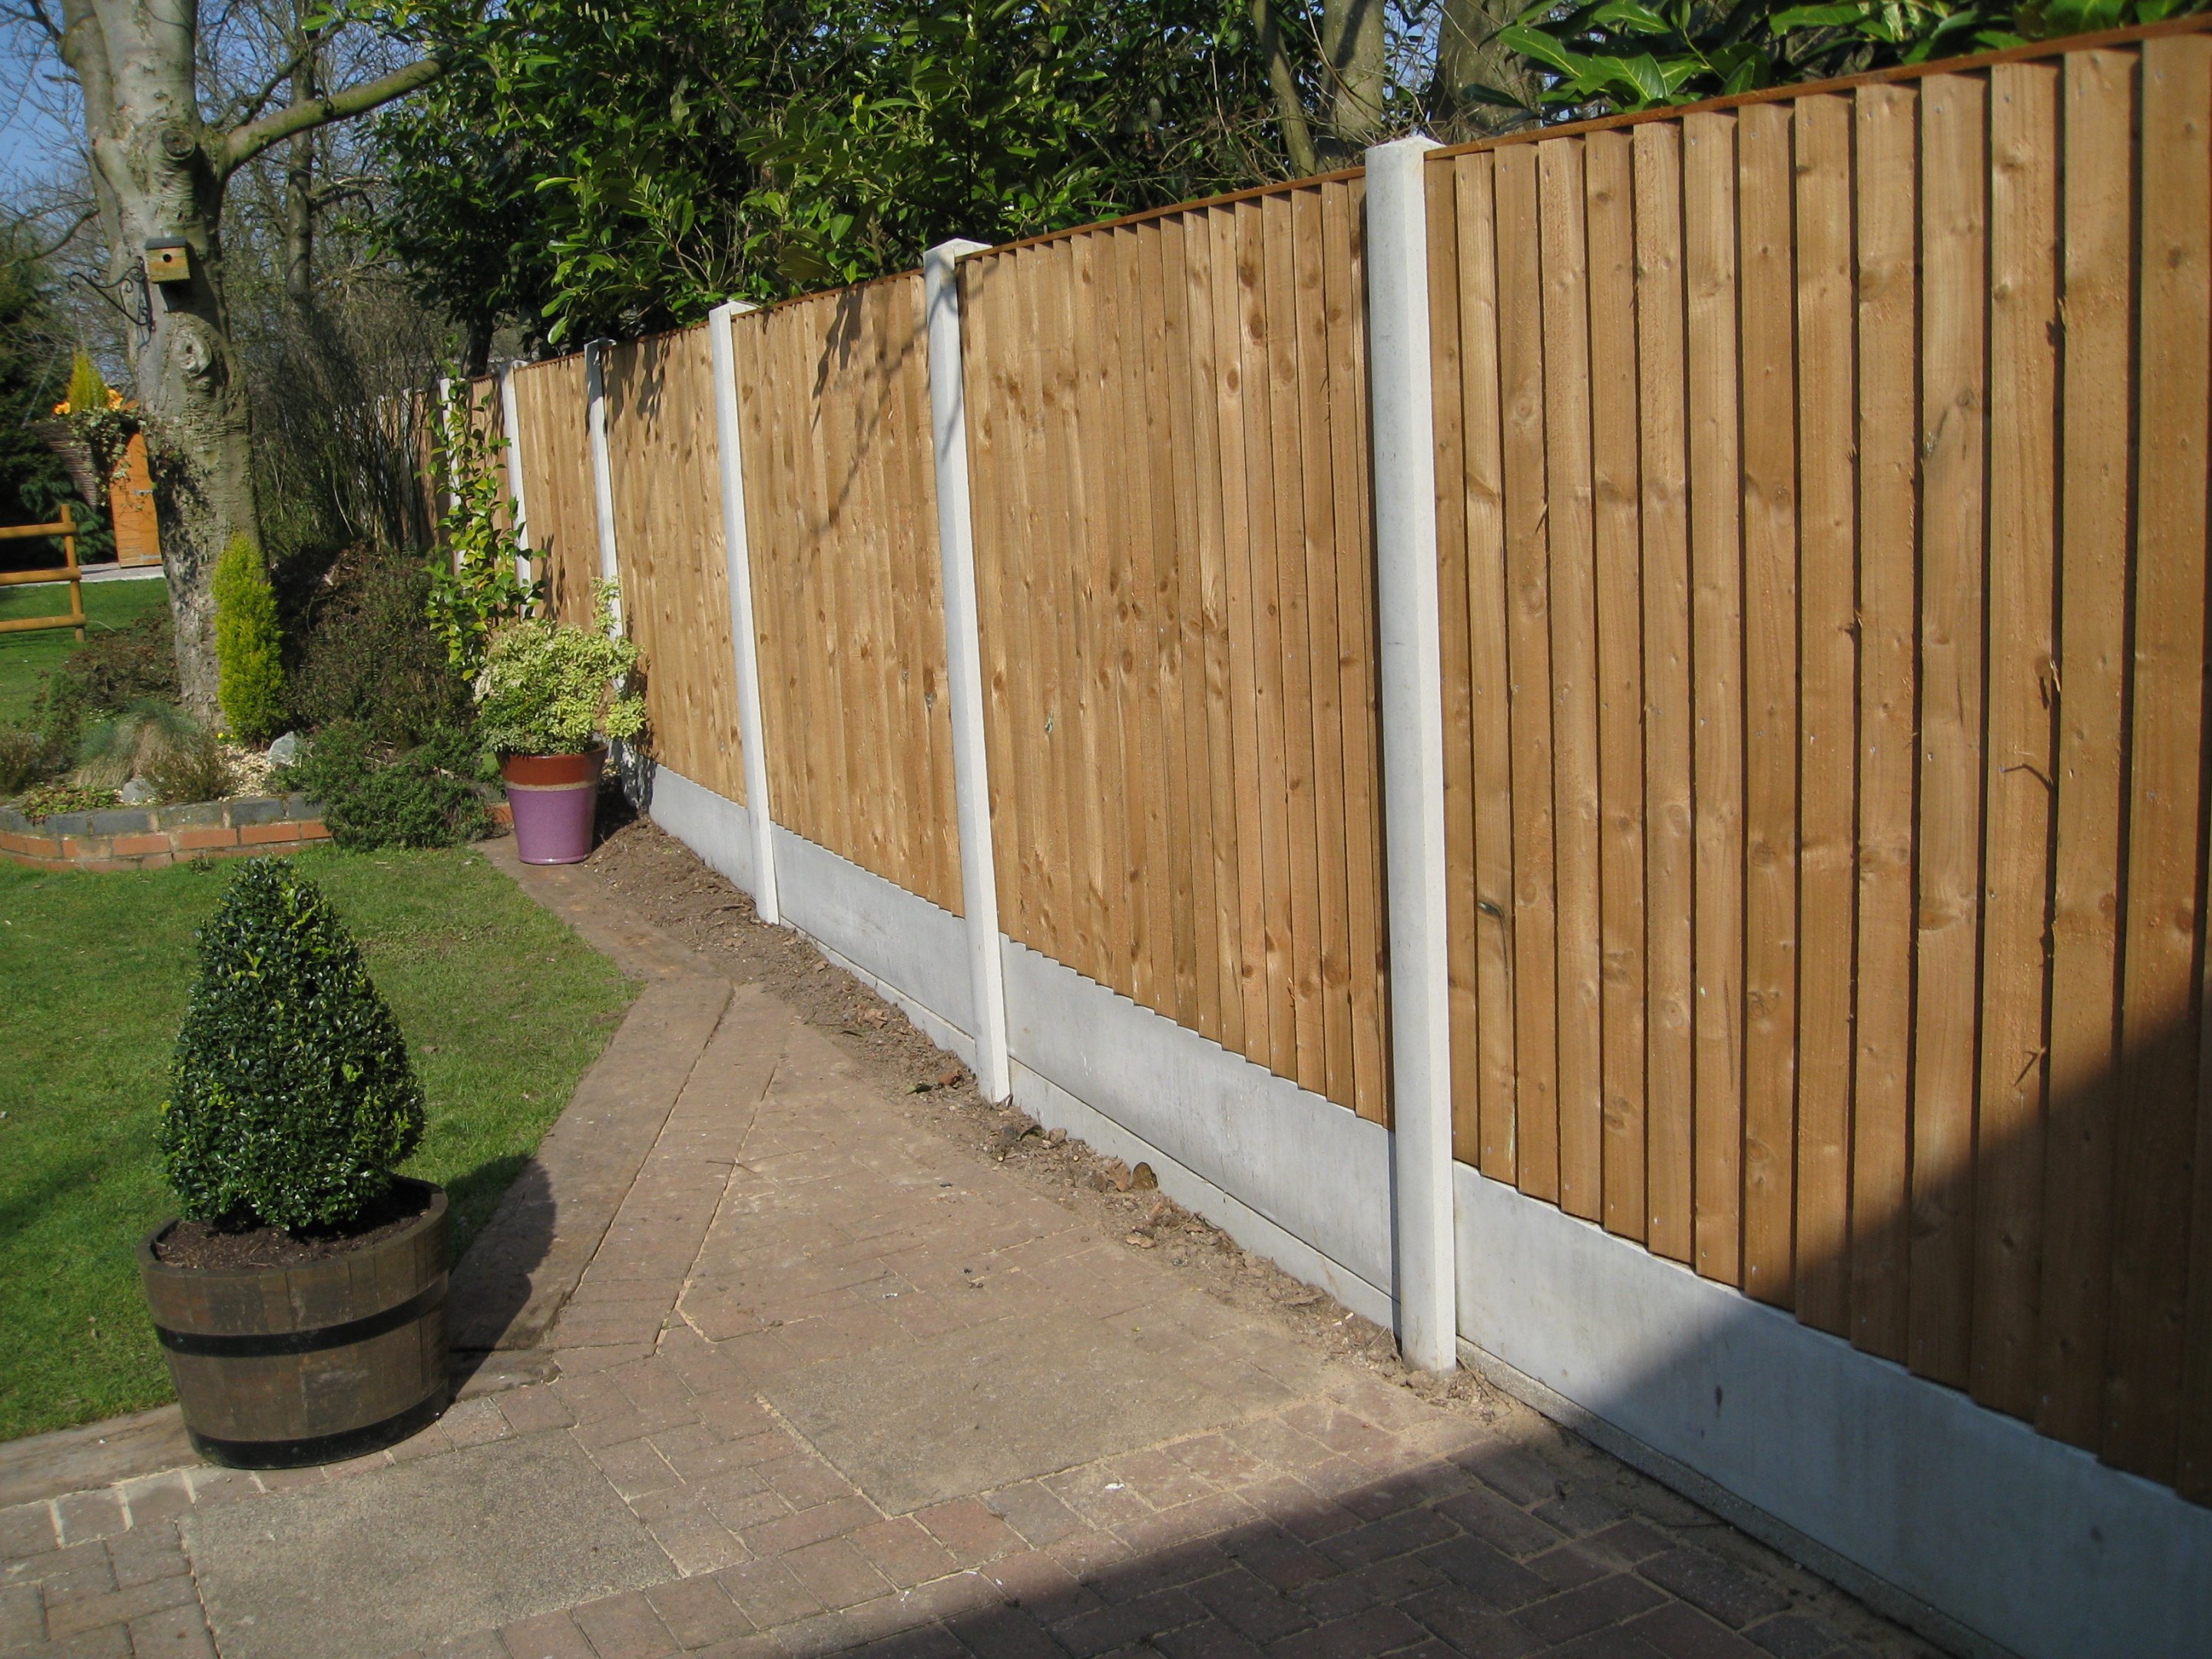 A garden in Birmingham surrounded by a fence. Fence panels are wooden with concrete posts in between.